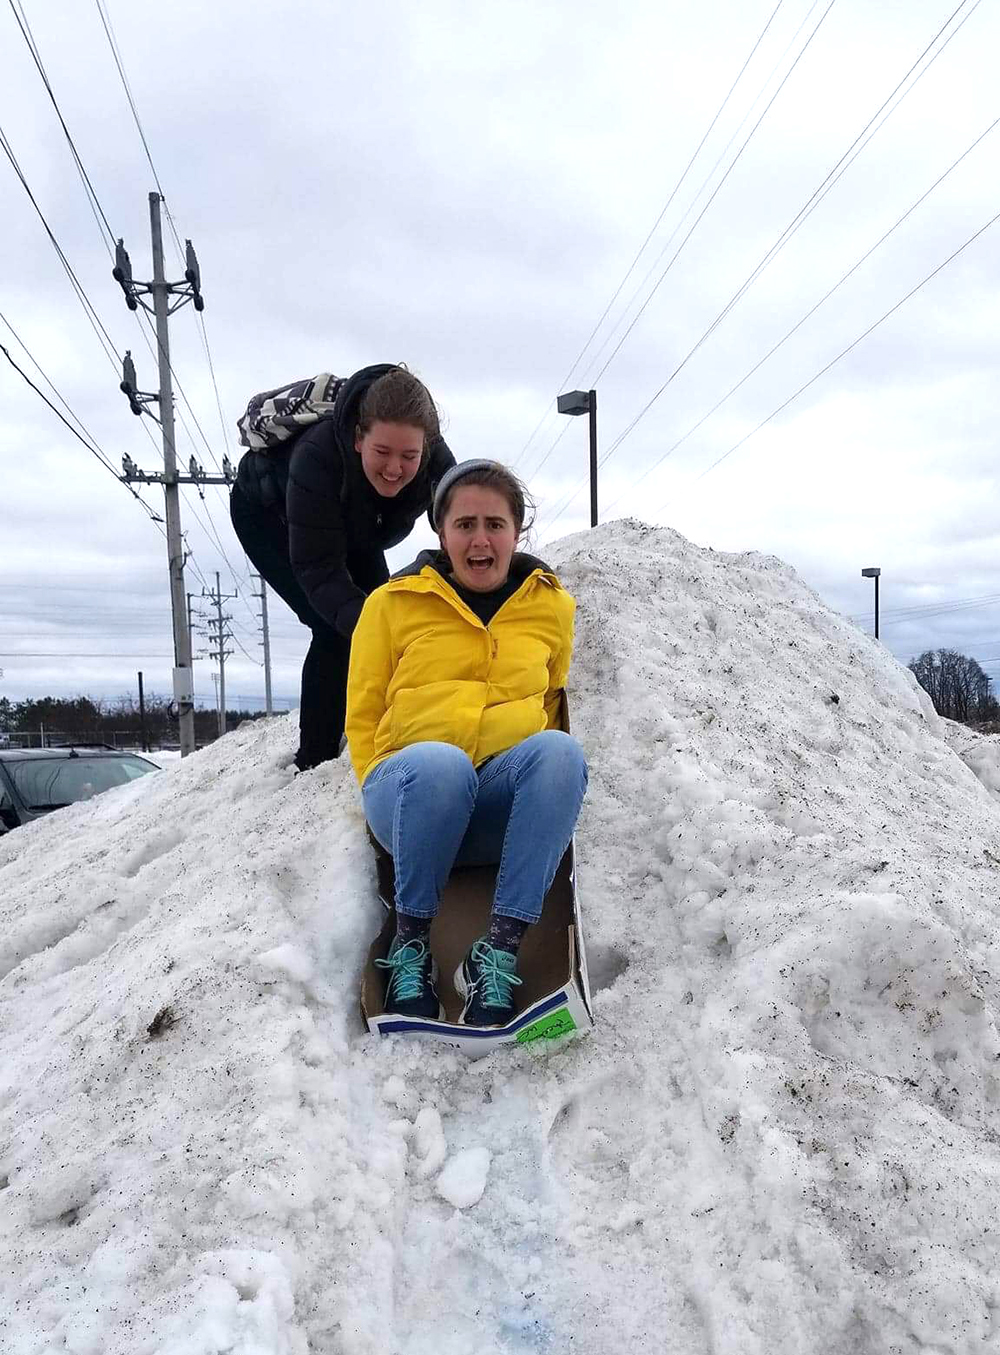 A friend pushes Anja Kenagy and her luge down a pile of snow in the parking lot